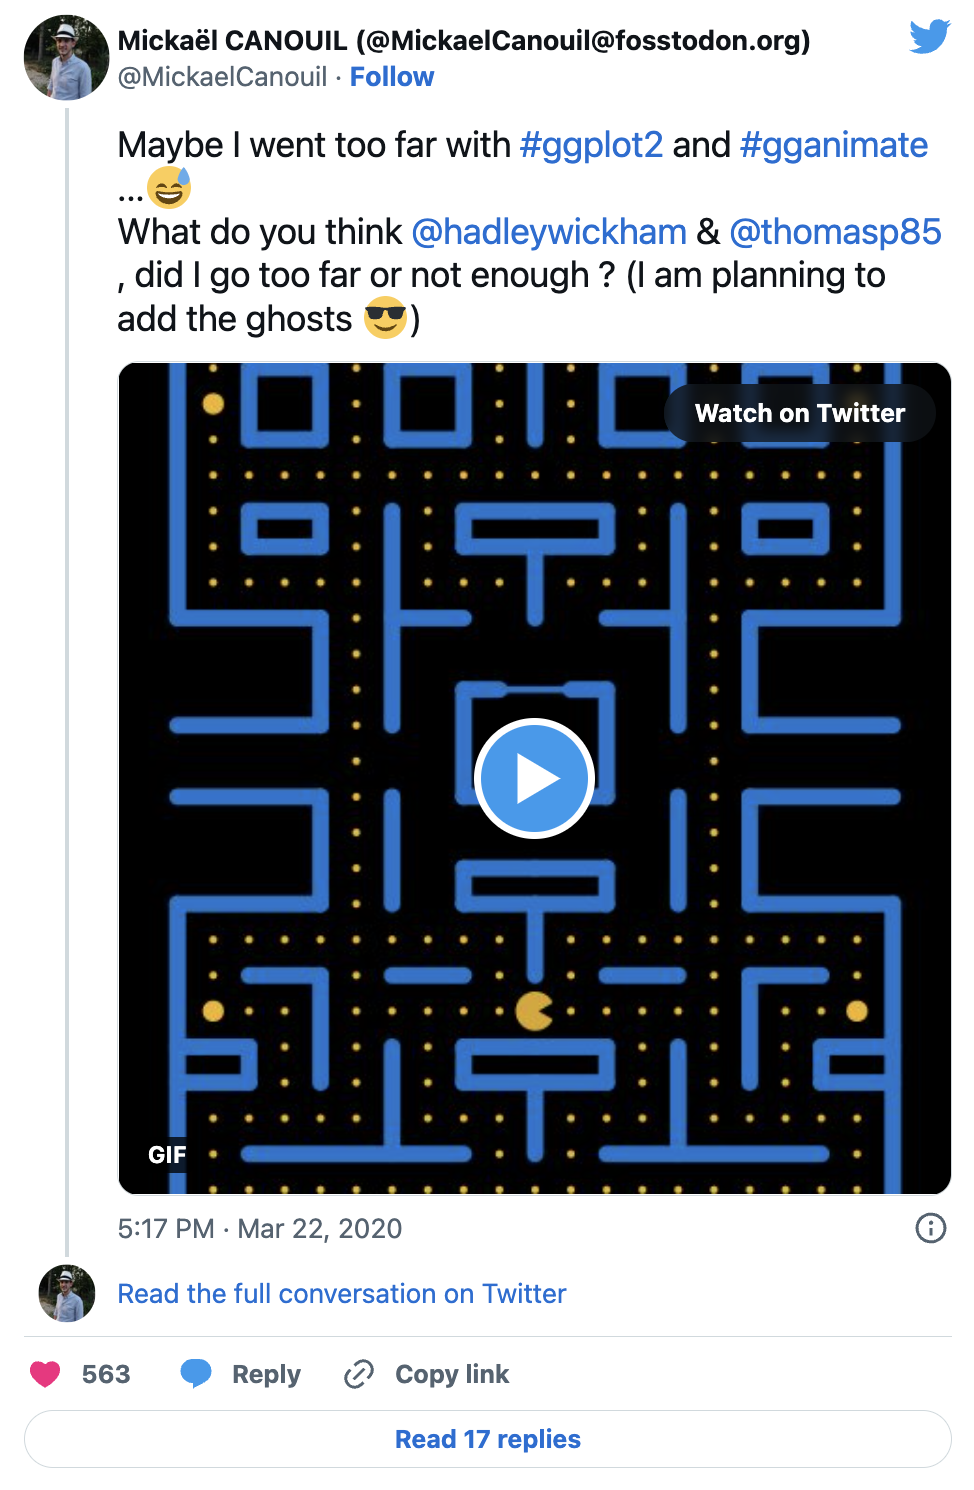 Tweet: Maybe I went too far with ggplot2 and gganimate ... 😅 What do you \@hadleywickham & \@thomasp85, did I go too far or not enough ? (I am planning to add the ghosts 😎) followed by an GIF of a PacMan moving in a labyrinth